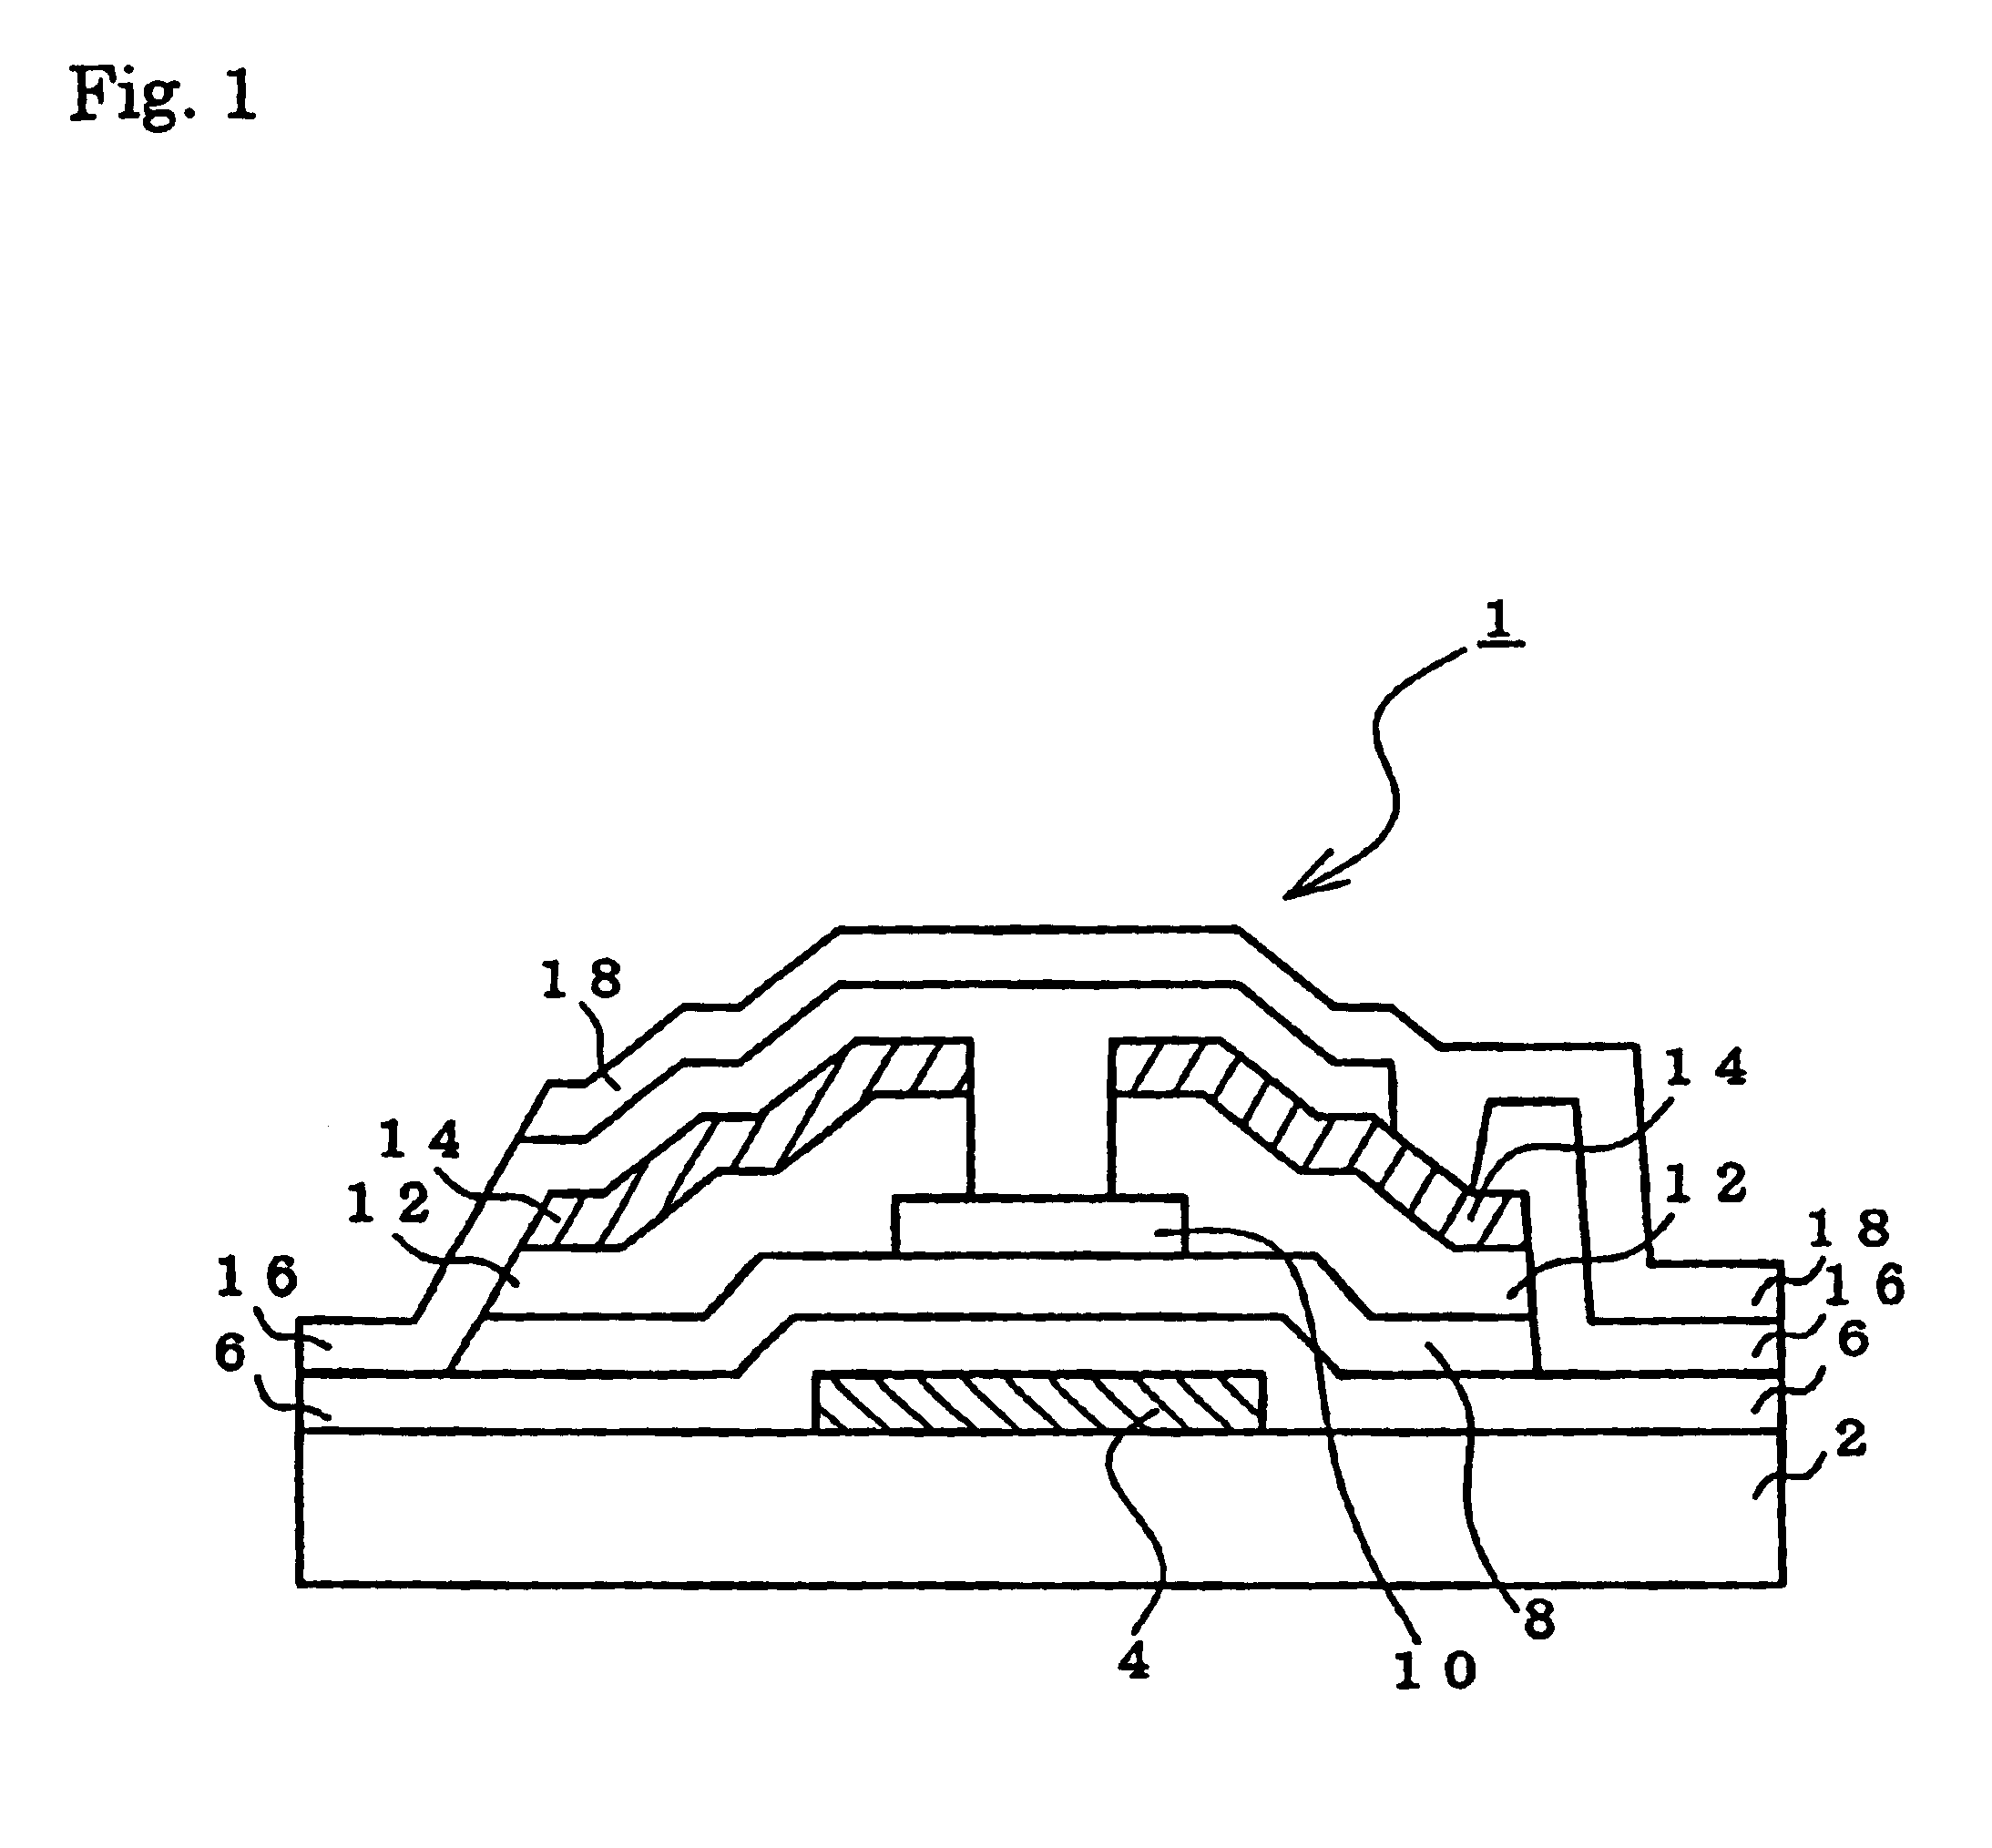 Conductive thin film for semiconductor device, semiconductor device, and method of manufacturing the same